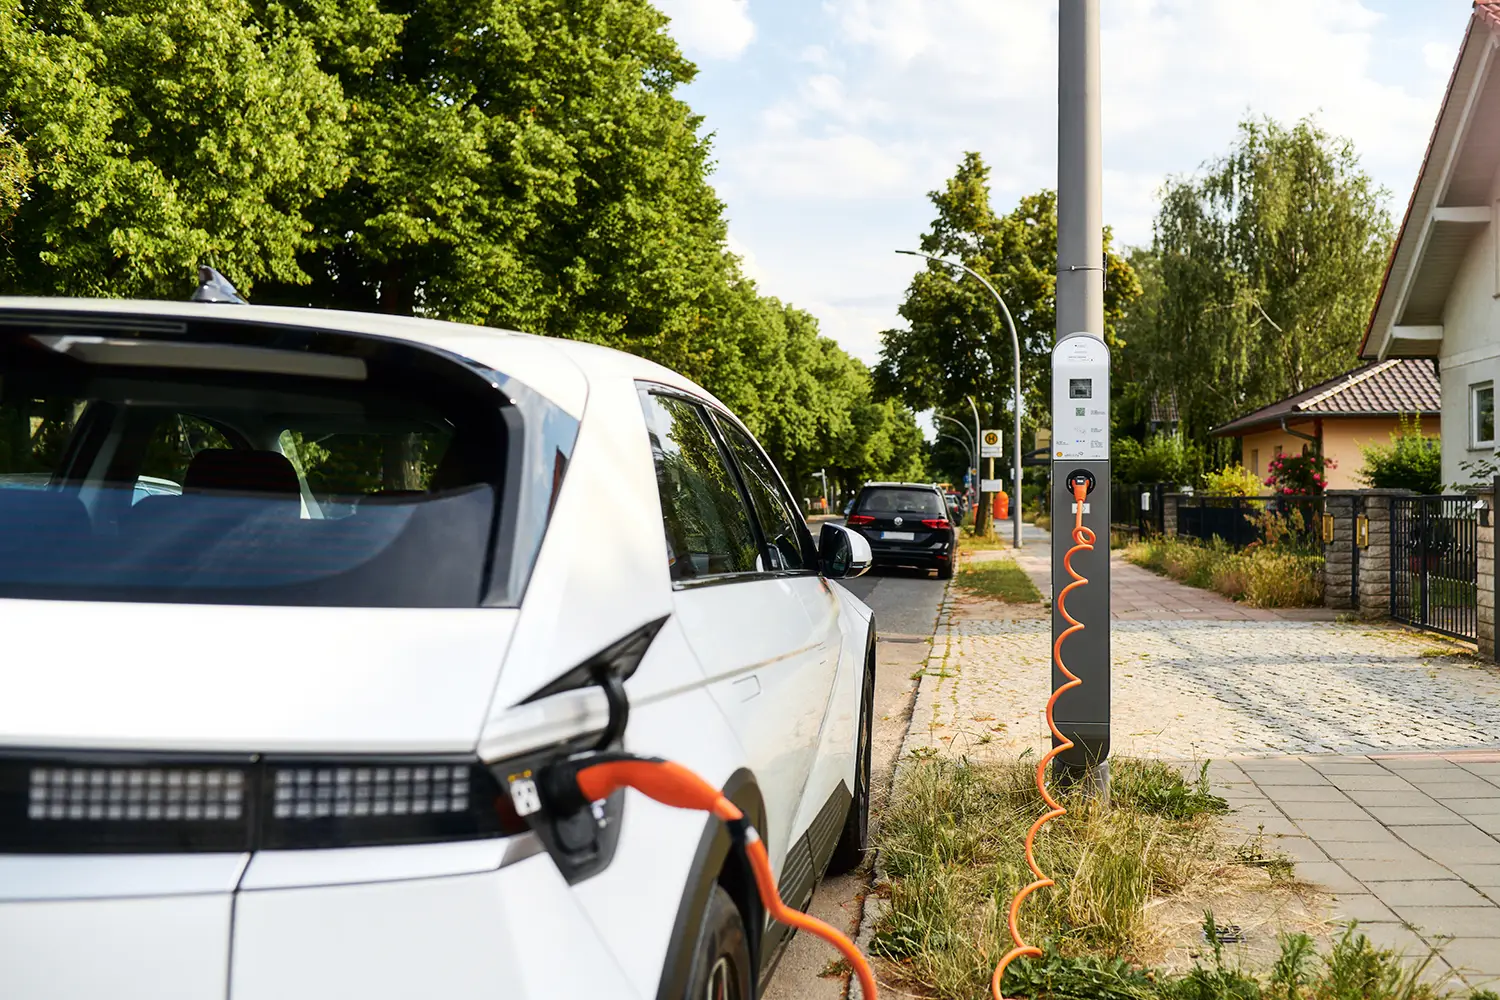 An EV is charging at a public lamppost charge point in Berlin, Germany, where ubitricity is operating hundreds of public charging stations.